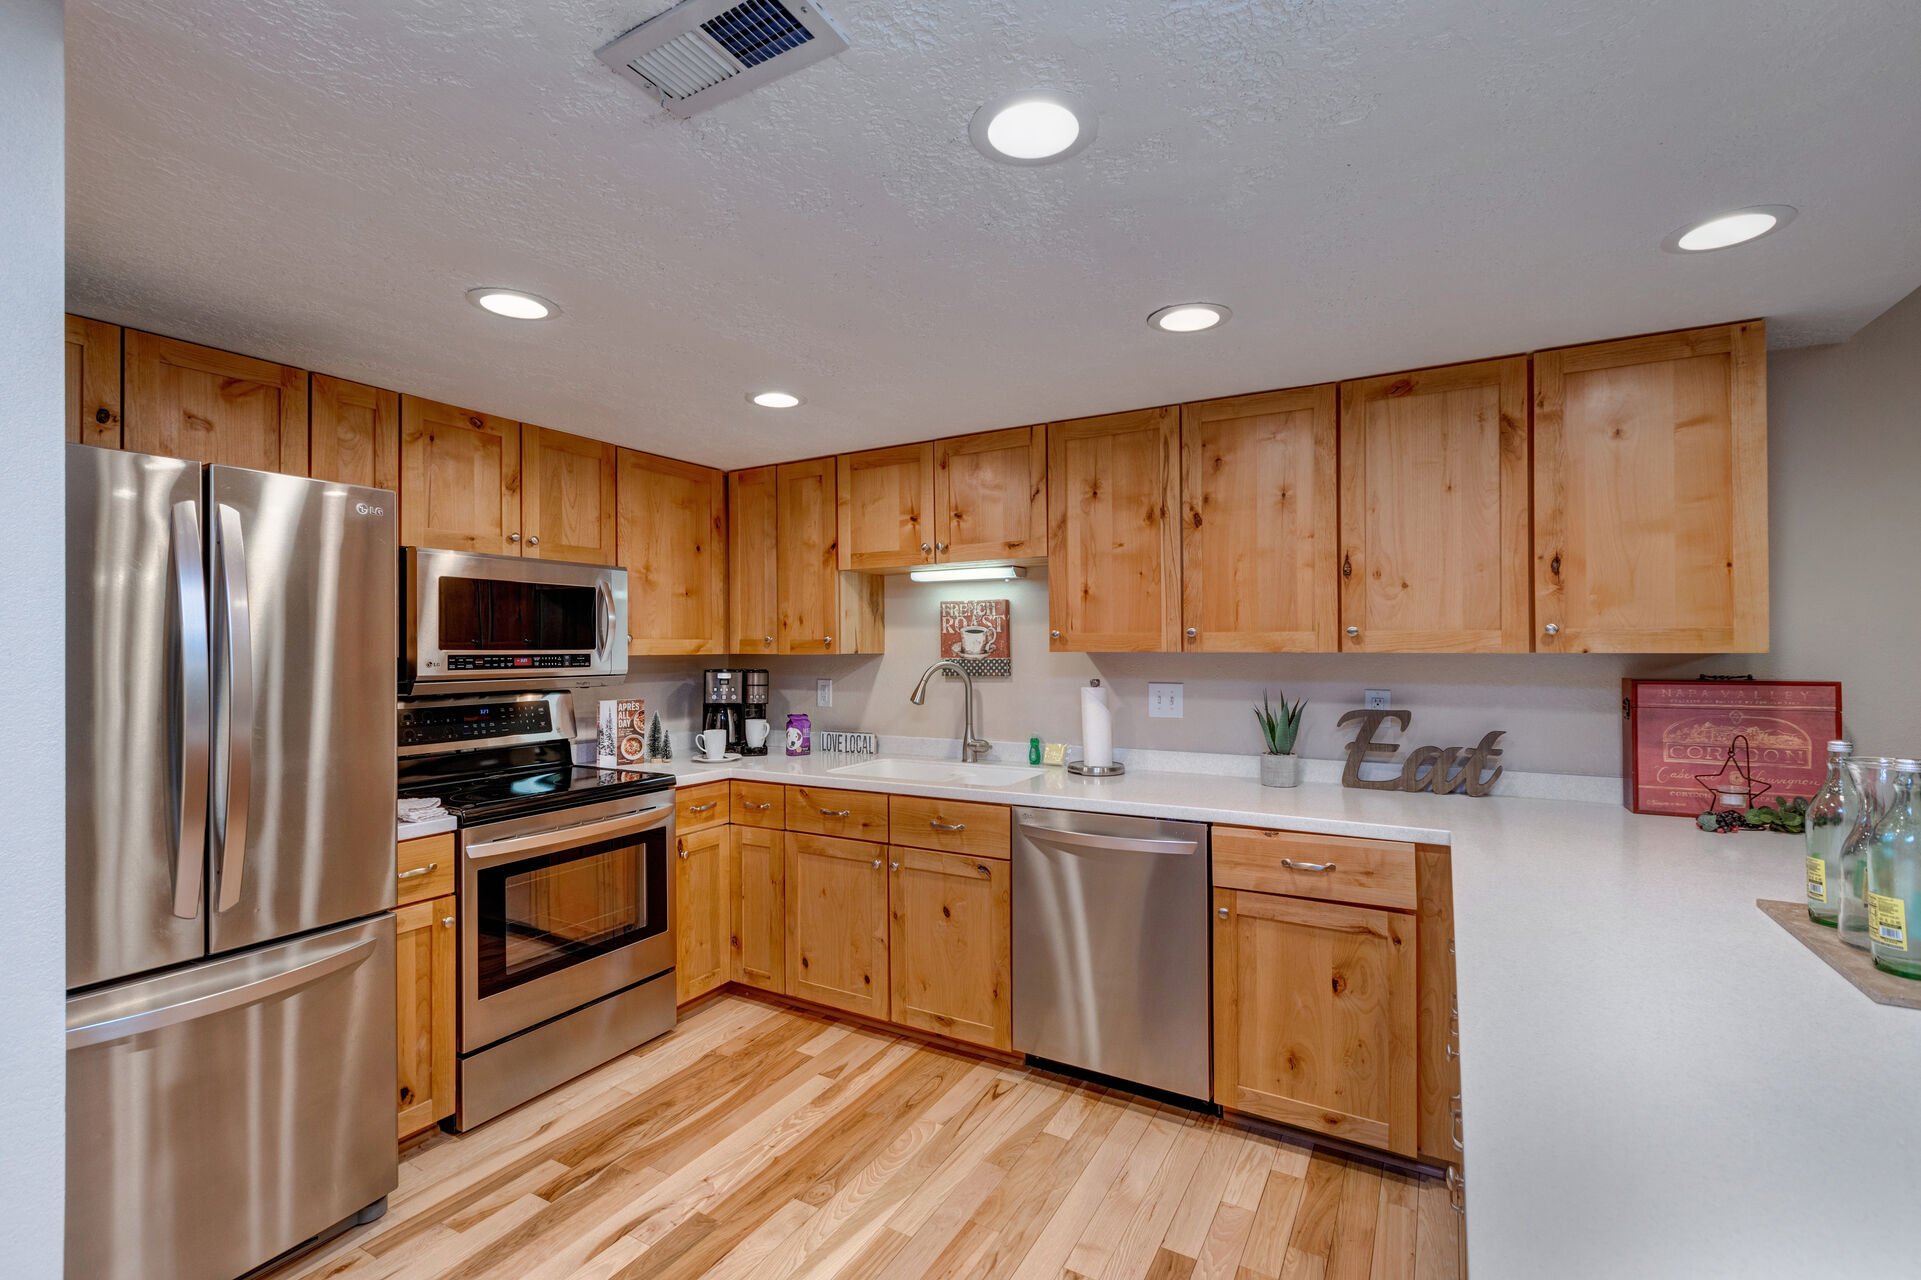 Fully Equipped Kitchen with beautiful stone countertops, stainless steel appliances, and ample counter space for meal prep